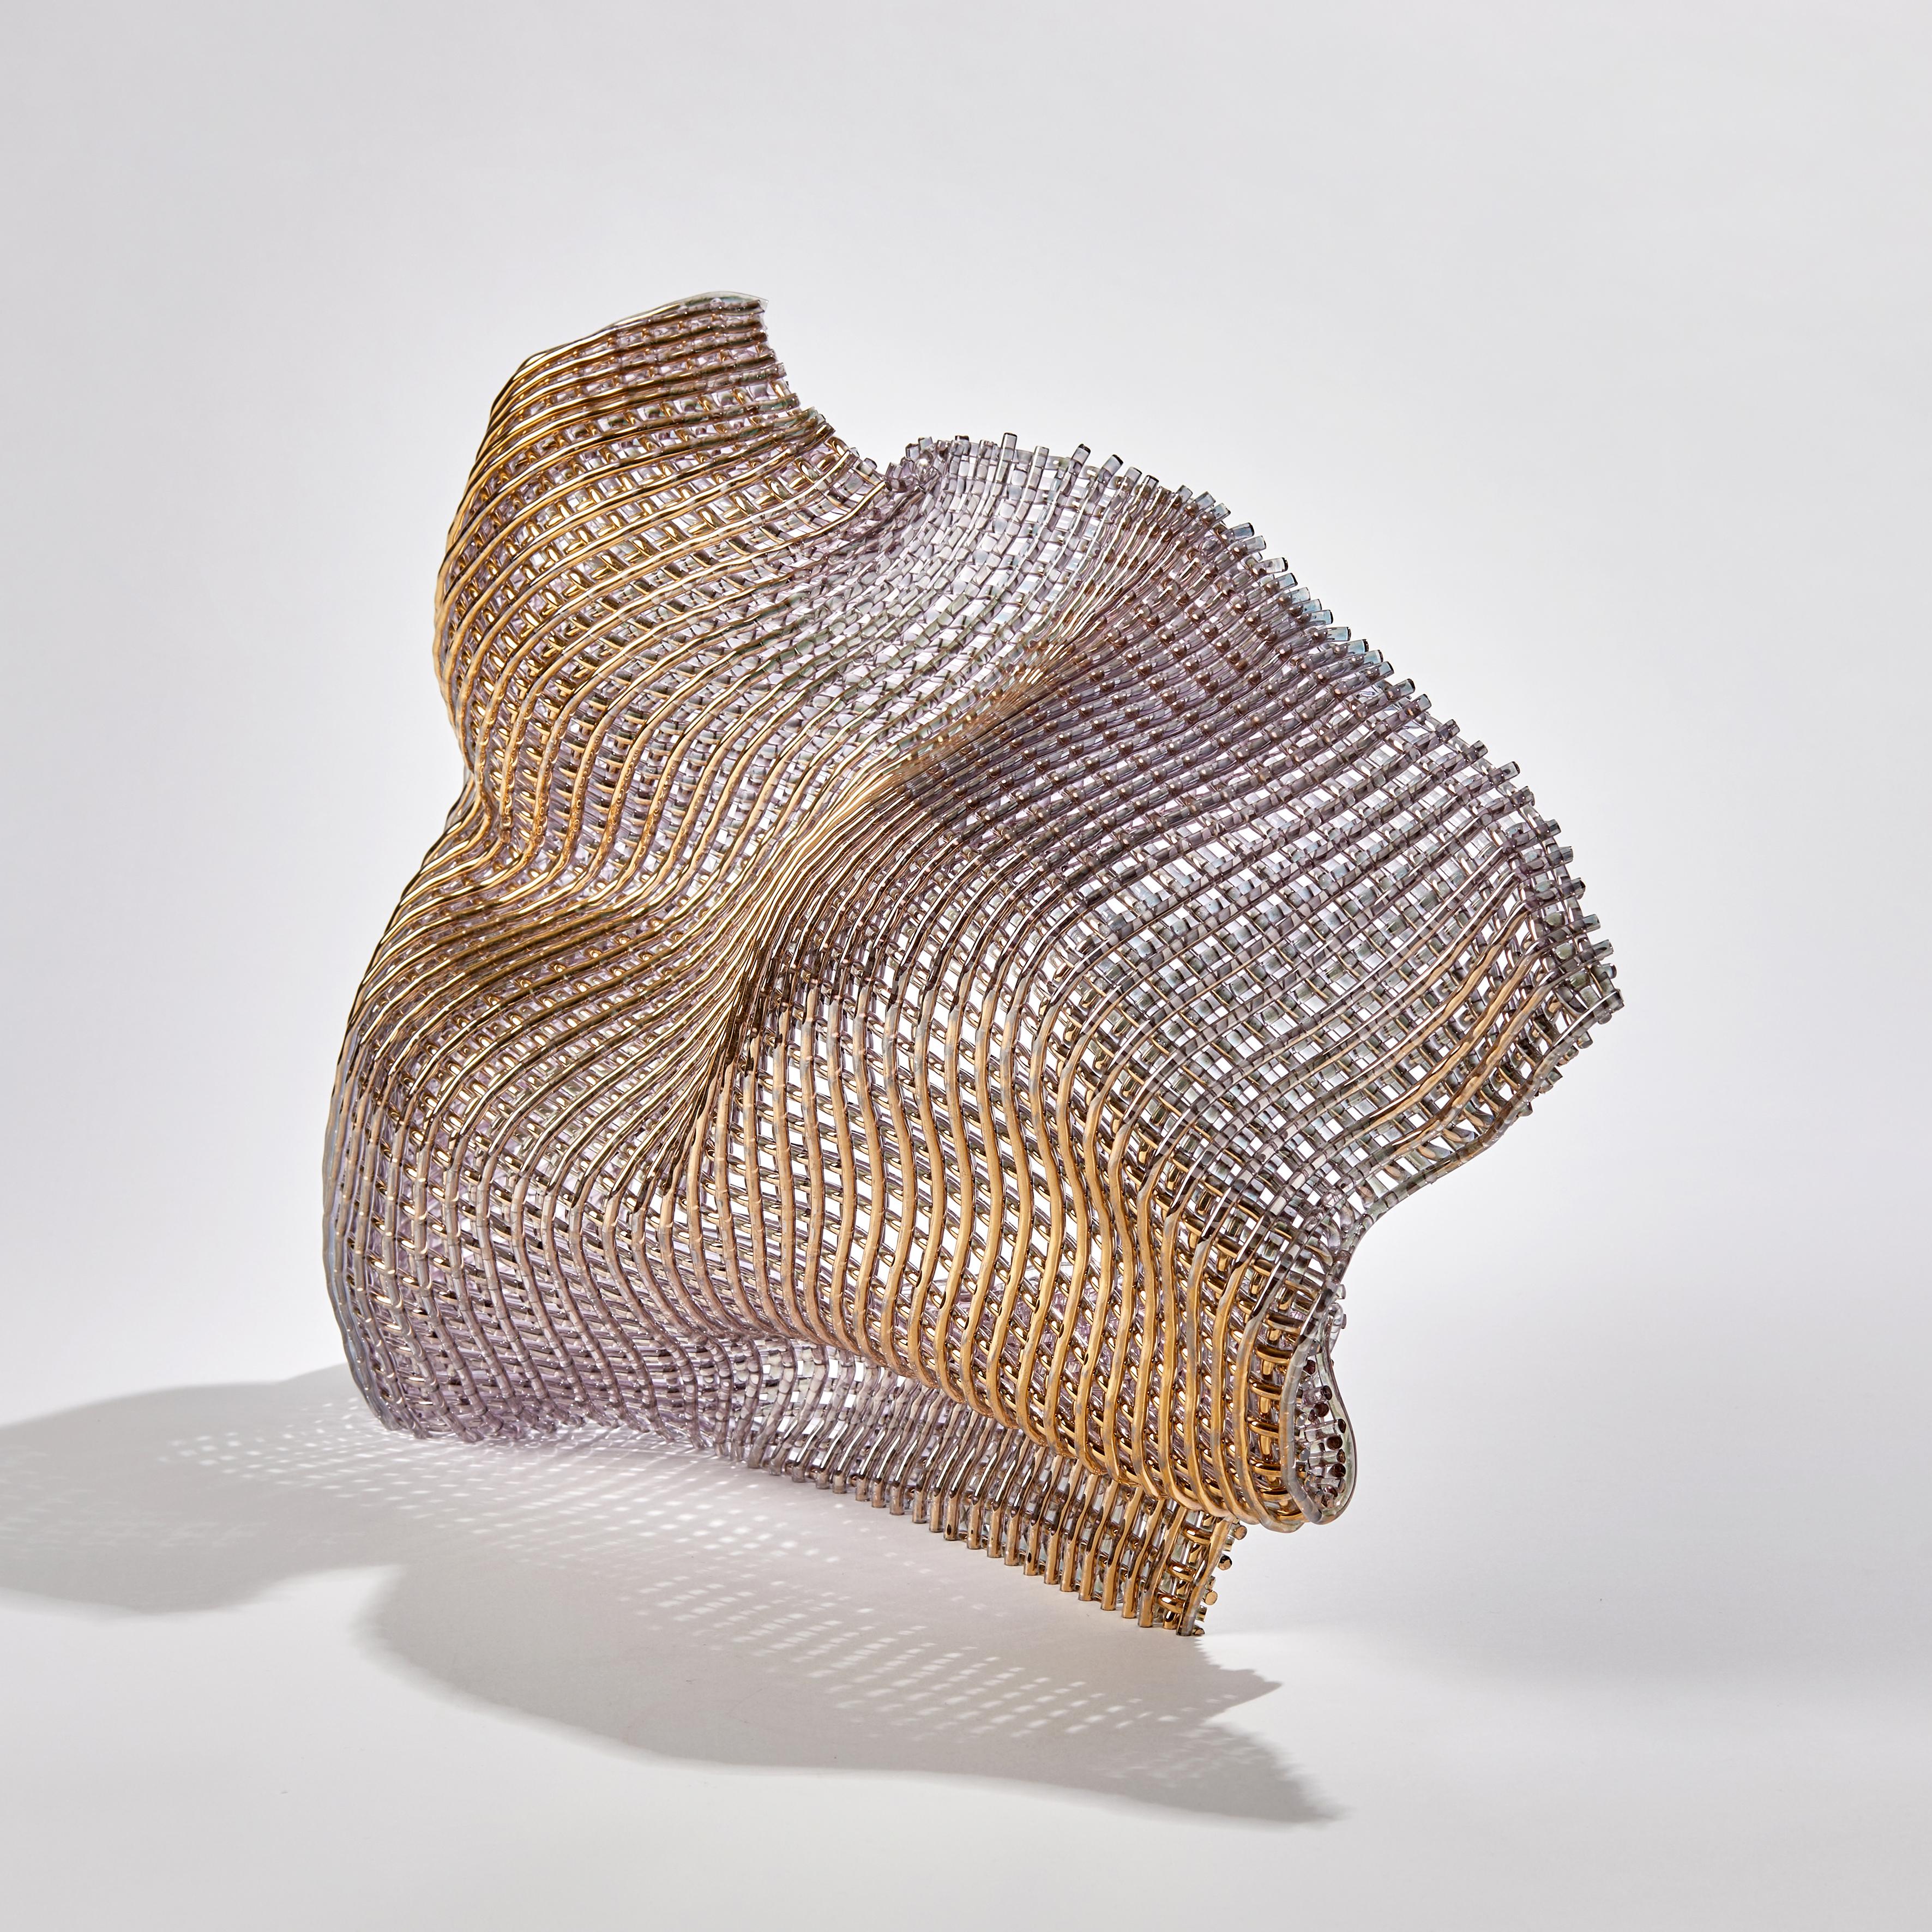 Organic Modern Synchronous I, a Unique Gold and Woven Glass Sculpture by Cathryn Shilling